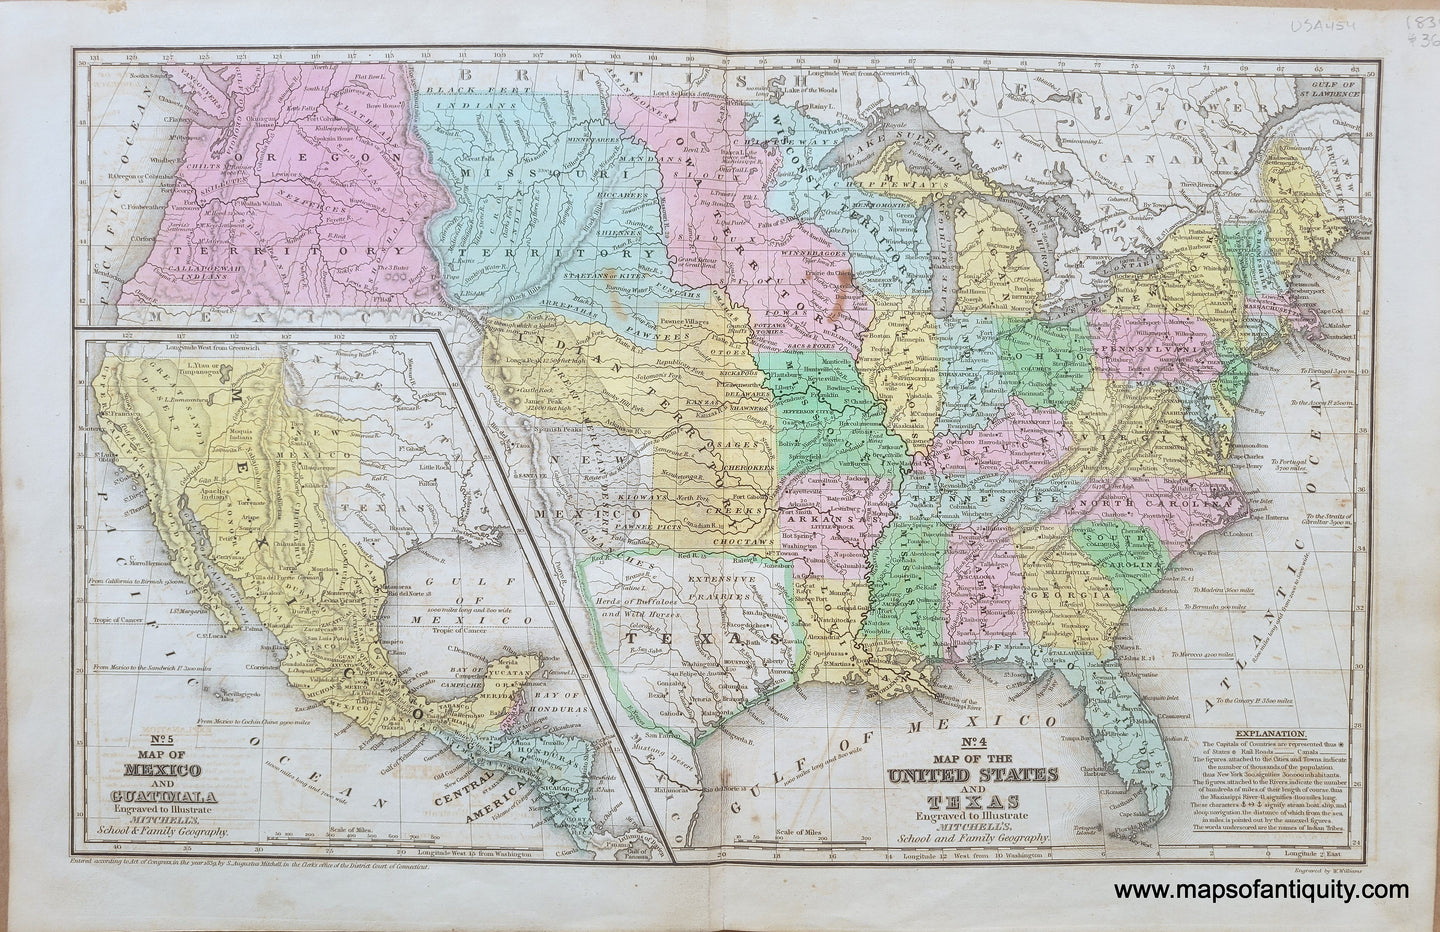 1839 - No. 4 Map of the United States and Texas, No. 5. Map of Mexico and Guatemala - Antique Map